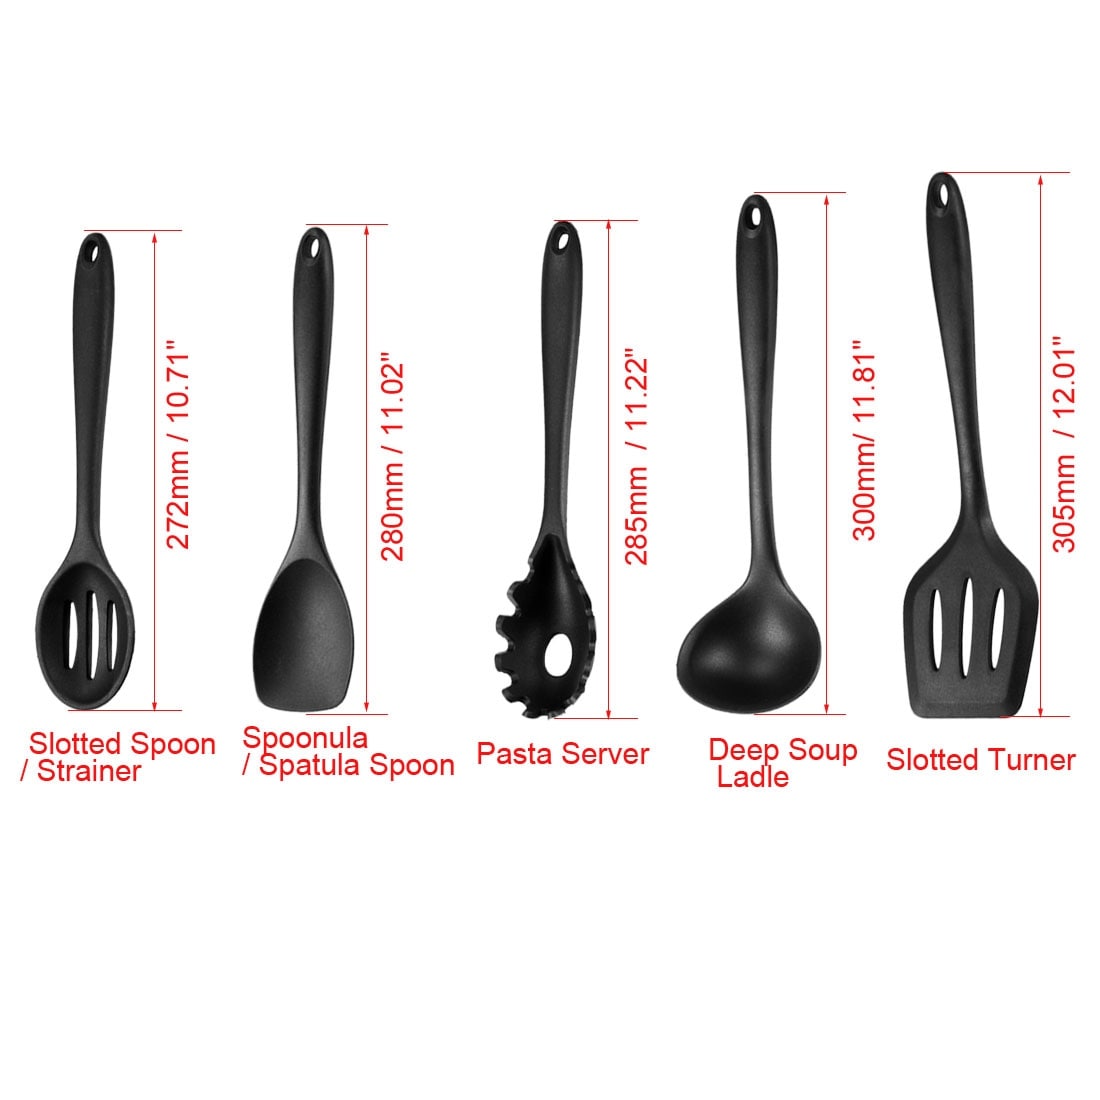 https://ak1.ostkcdn.com/images/products/is/images/direct/d8e8e4924d3023ca8a78ded46d8dde48b80d787b/Kitchen-Utensil-Set---Silicone-Cooking-Utensils.-Gadgets-for-Nonstick-Cookware.jpg